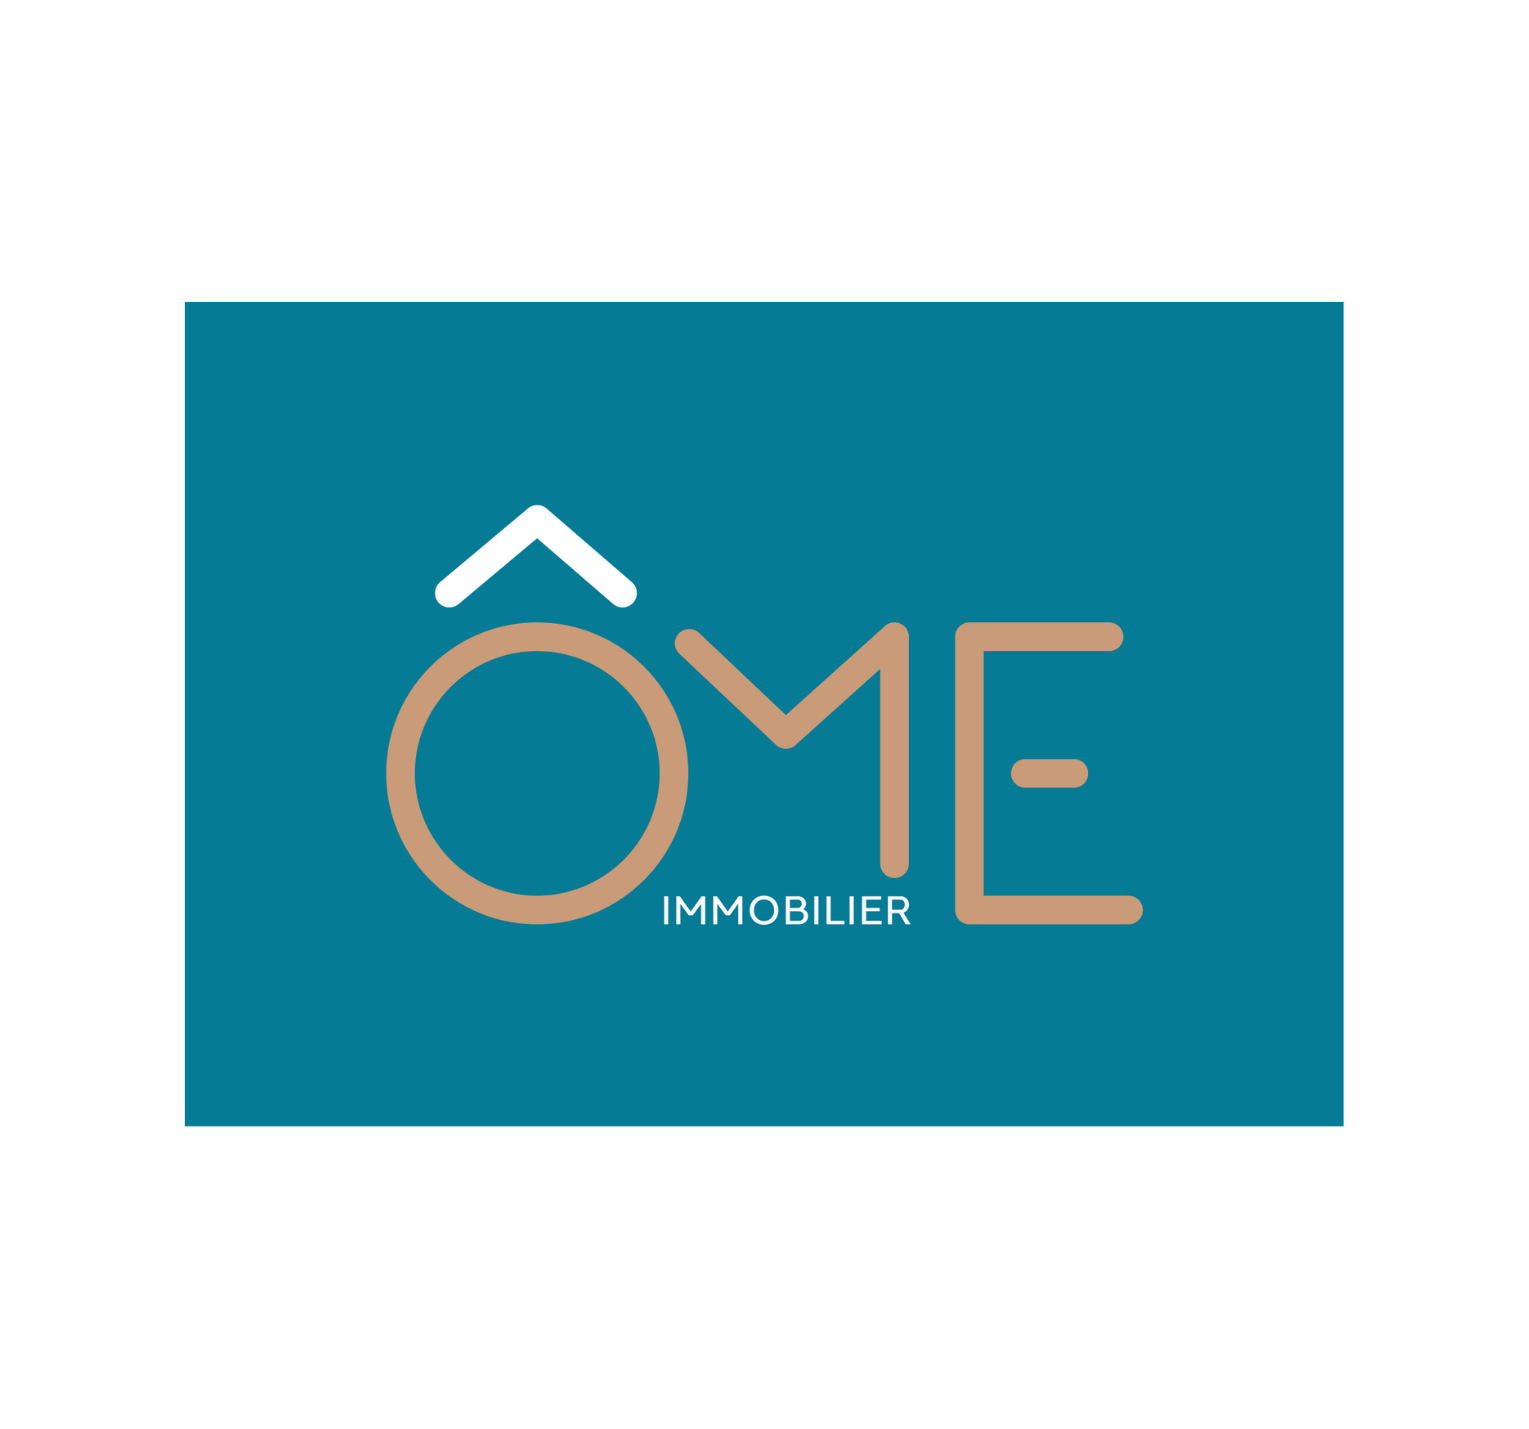 ÔME IMMOBILIER